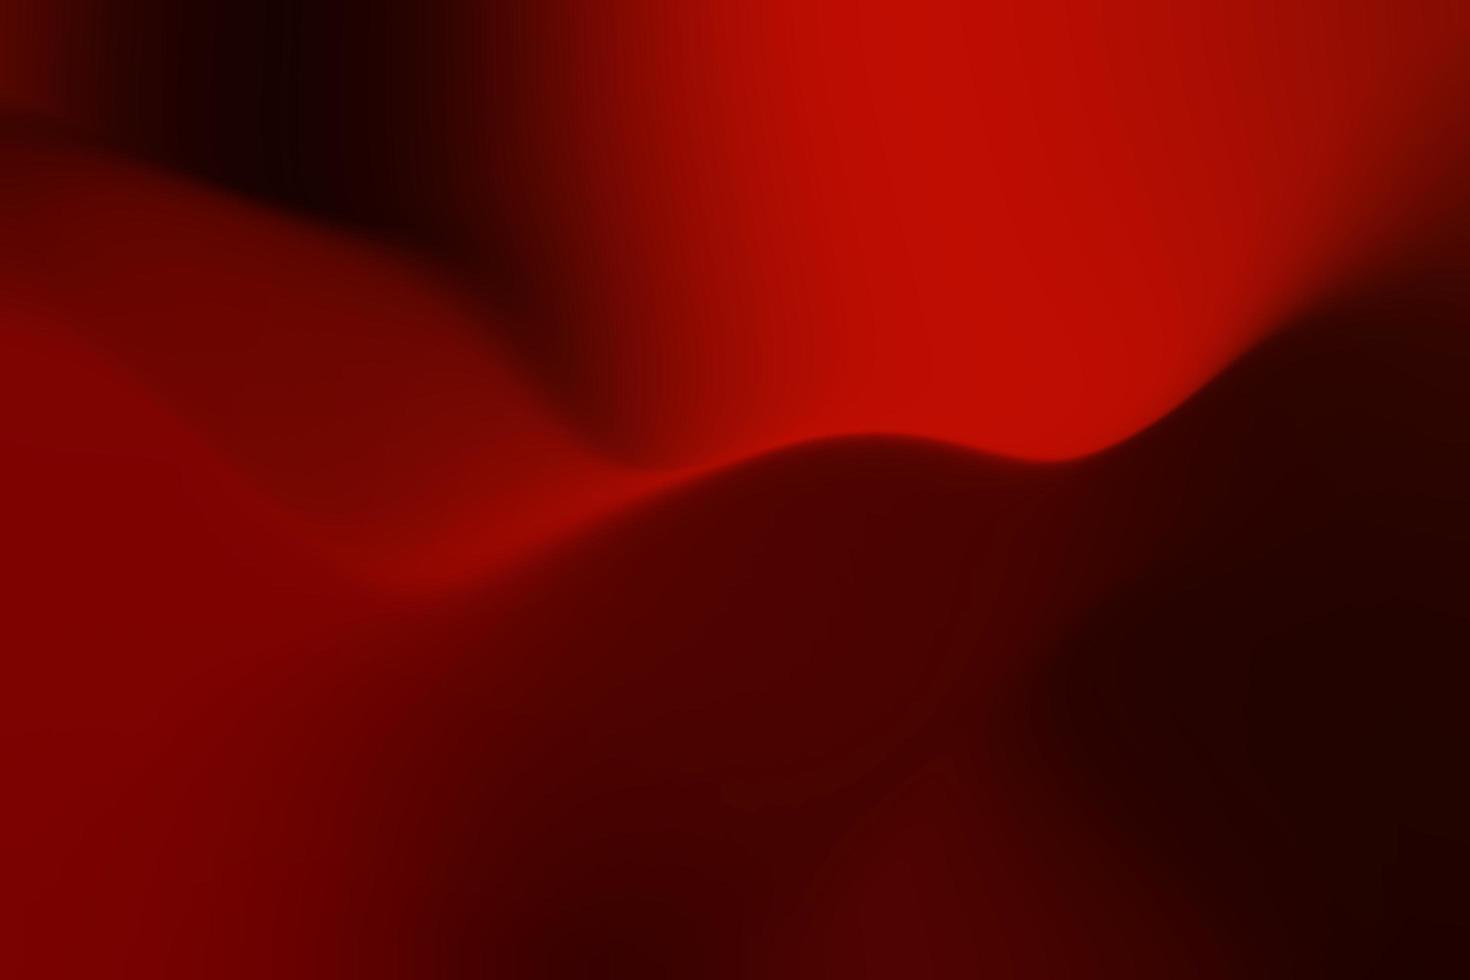 Black and Red Gradient Background Illustration, Modern and Gothic Style photo